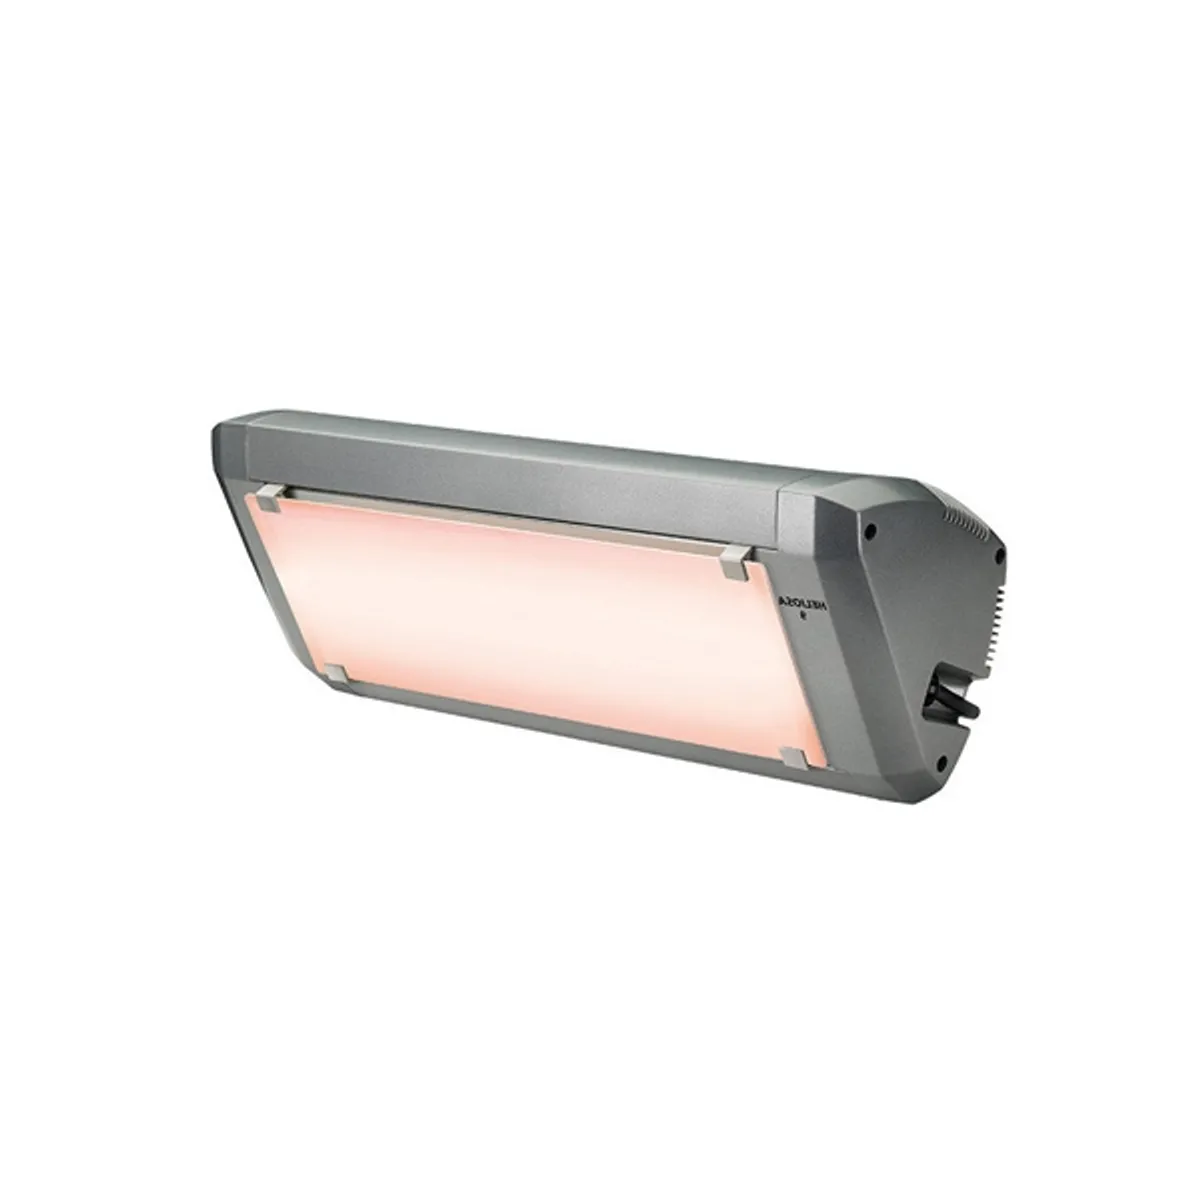 Apollo infrared wall heater Inside Out Contracts2